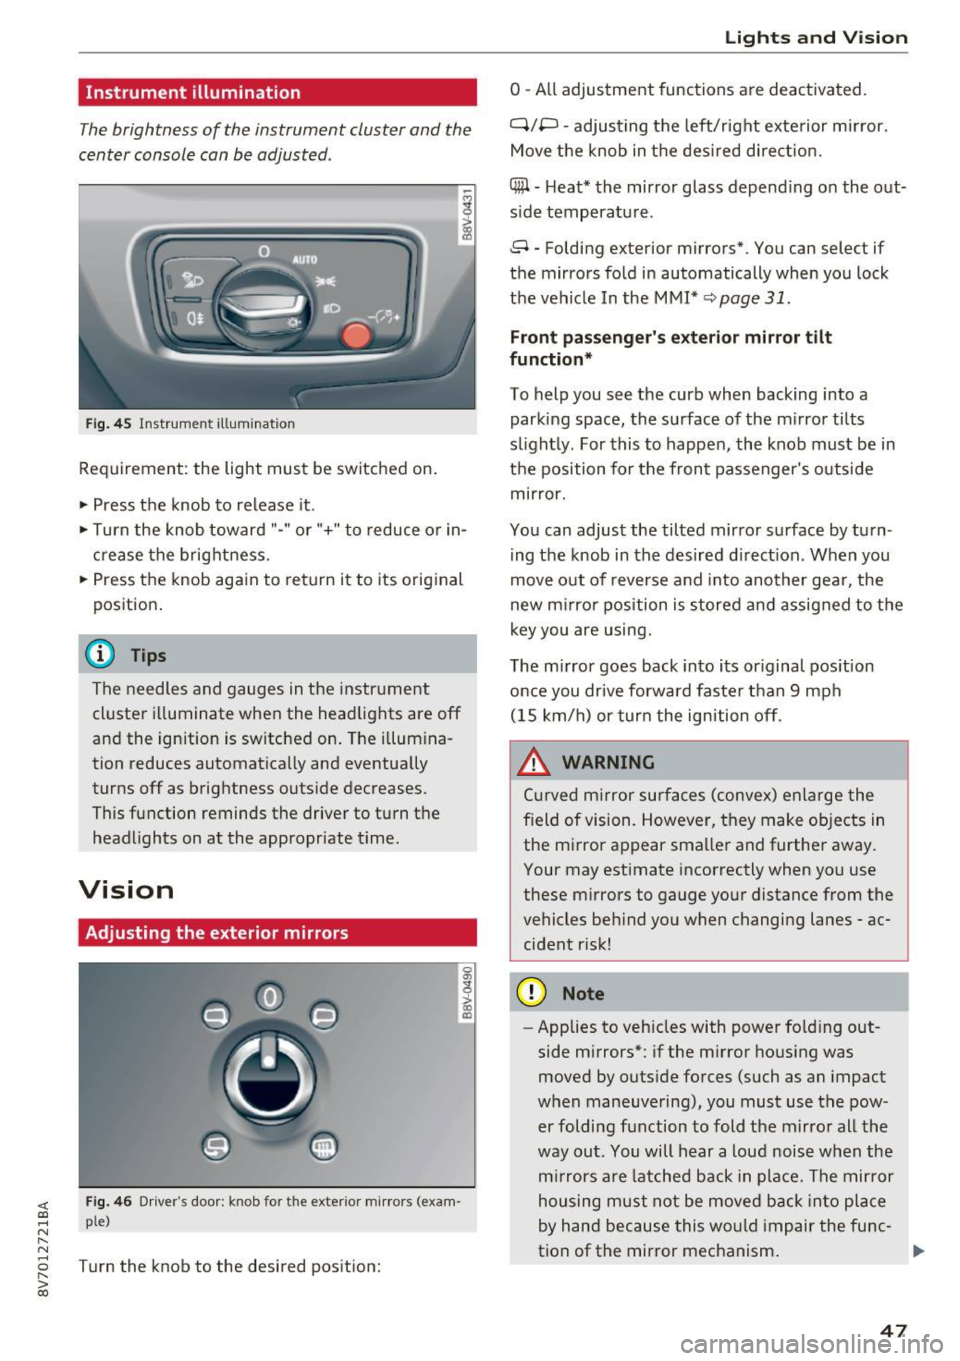 AUDI A3 CABRIOLET 2016  Owners Manual <( co ..... N 
" N ..... 0 r--. > 00 
Instrument  illumination 
The brightness  of  the  instrument  cluster  and  the 
center  console can be adjusted . 
Fig. 45  Instrumellt  illumination 
Requirem